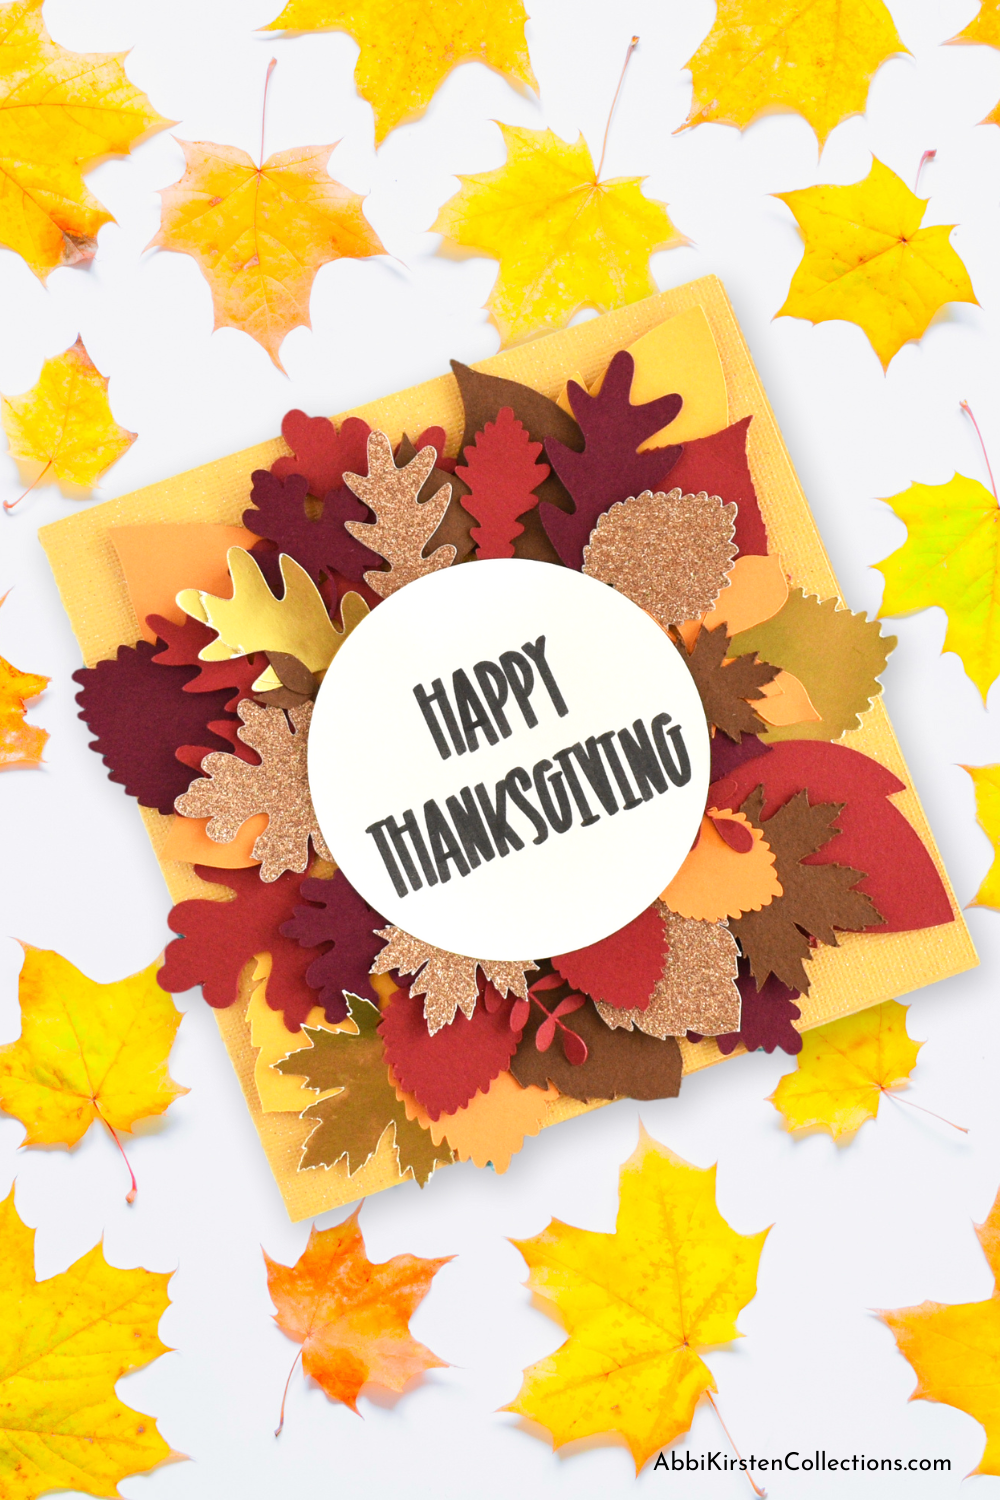 How to Make Paper Crafts With Cricut: DIY Thanksgiving Card Tutorial